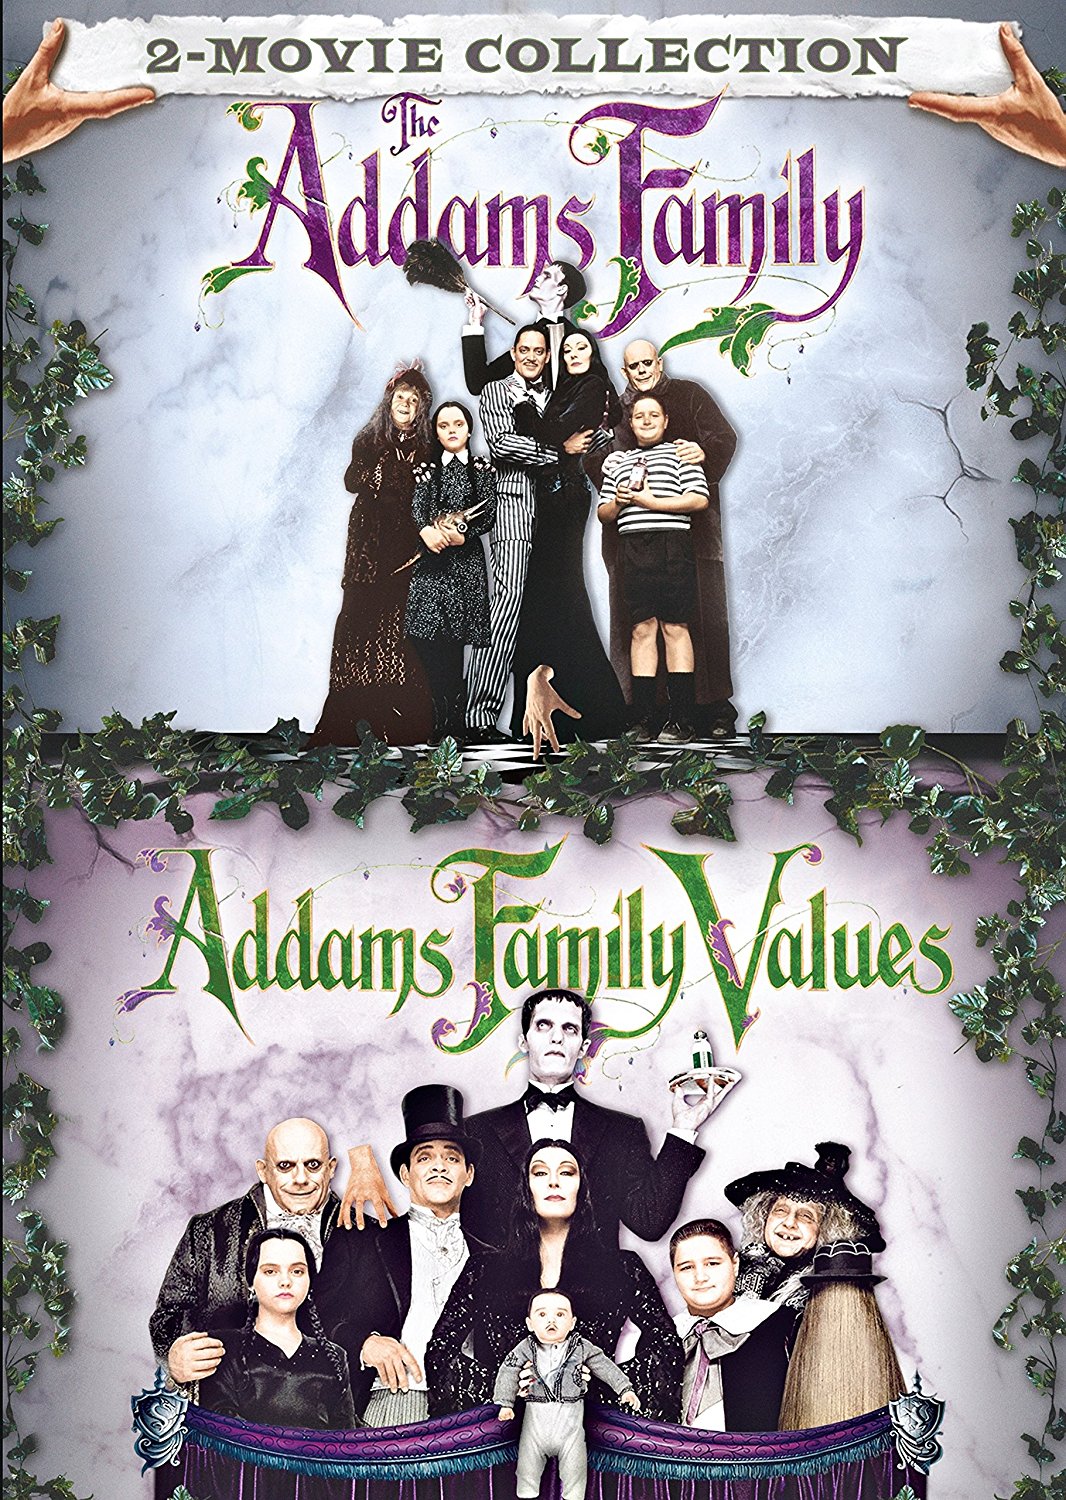 The 90s Addams Family live action movie Values can’t be topped